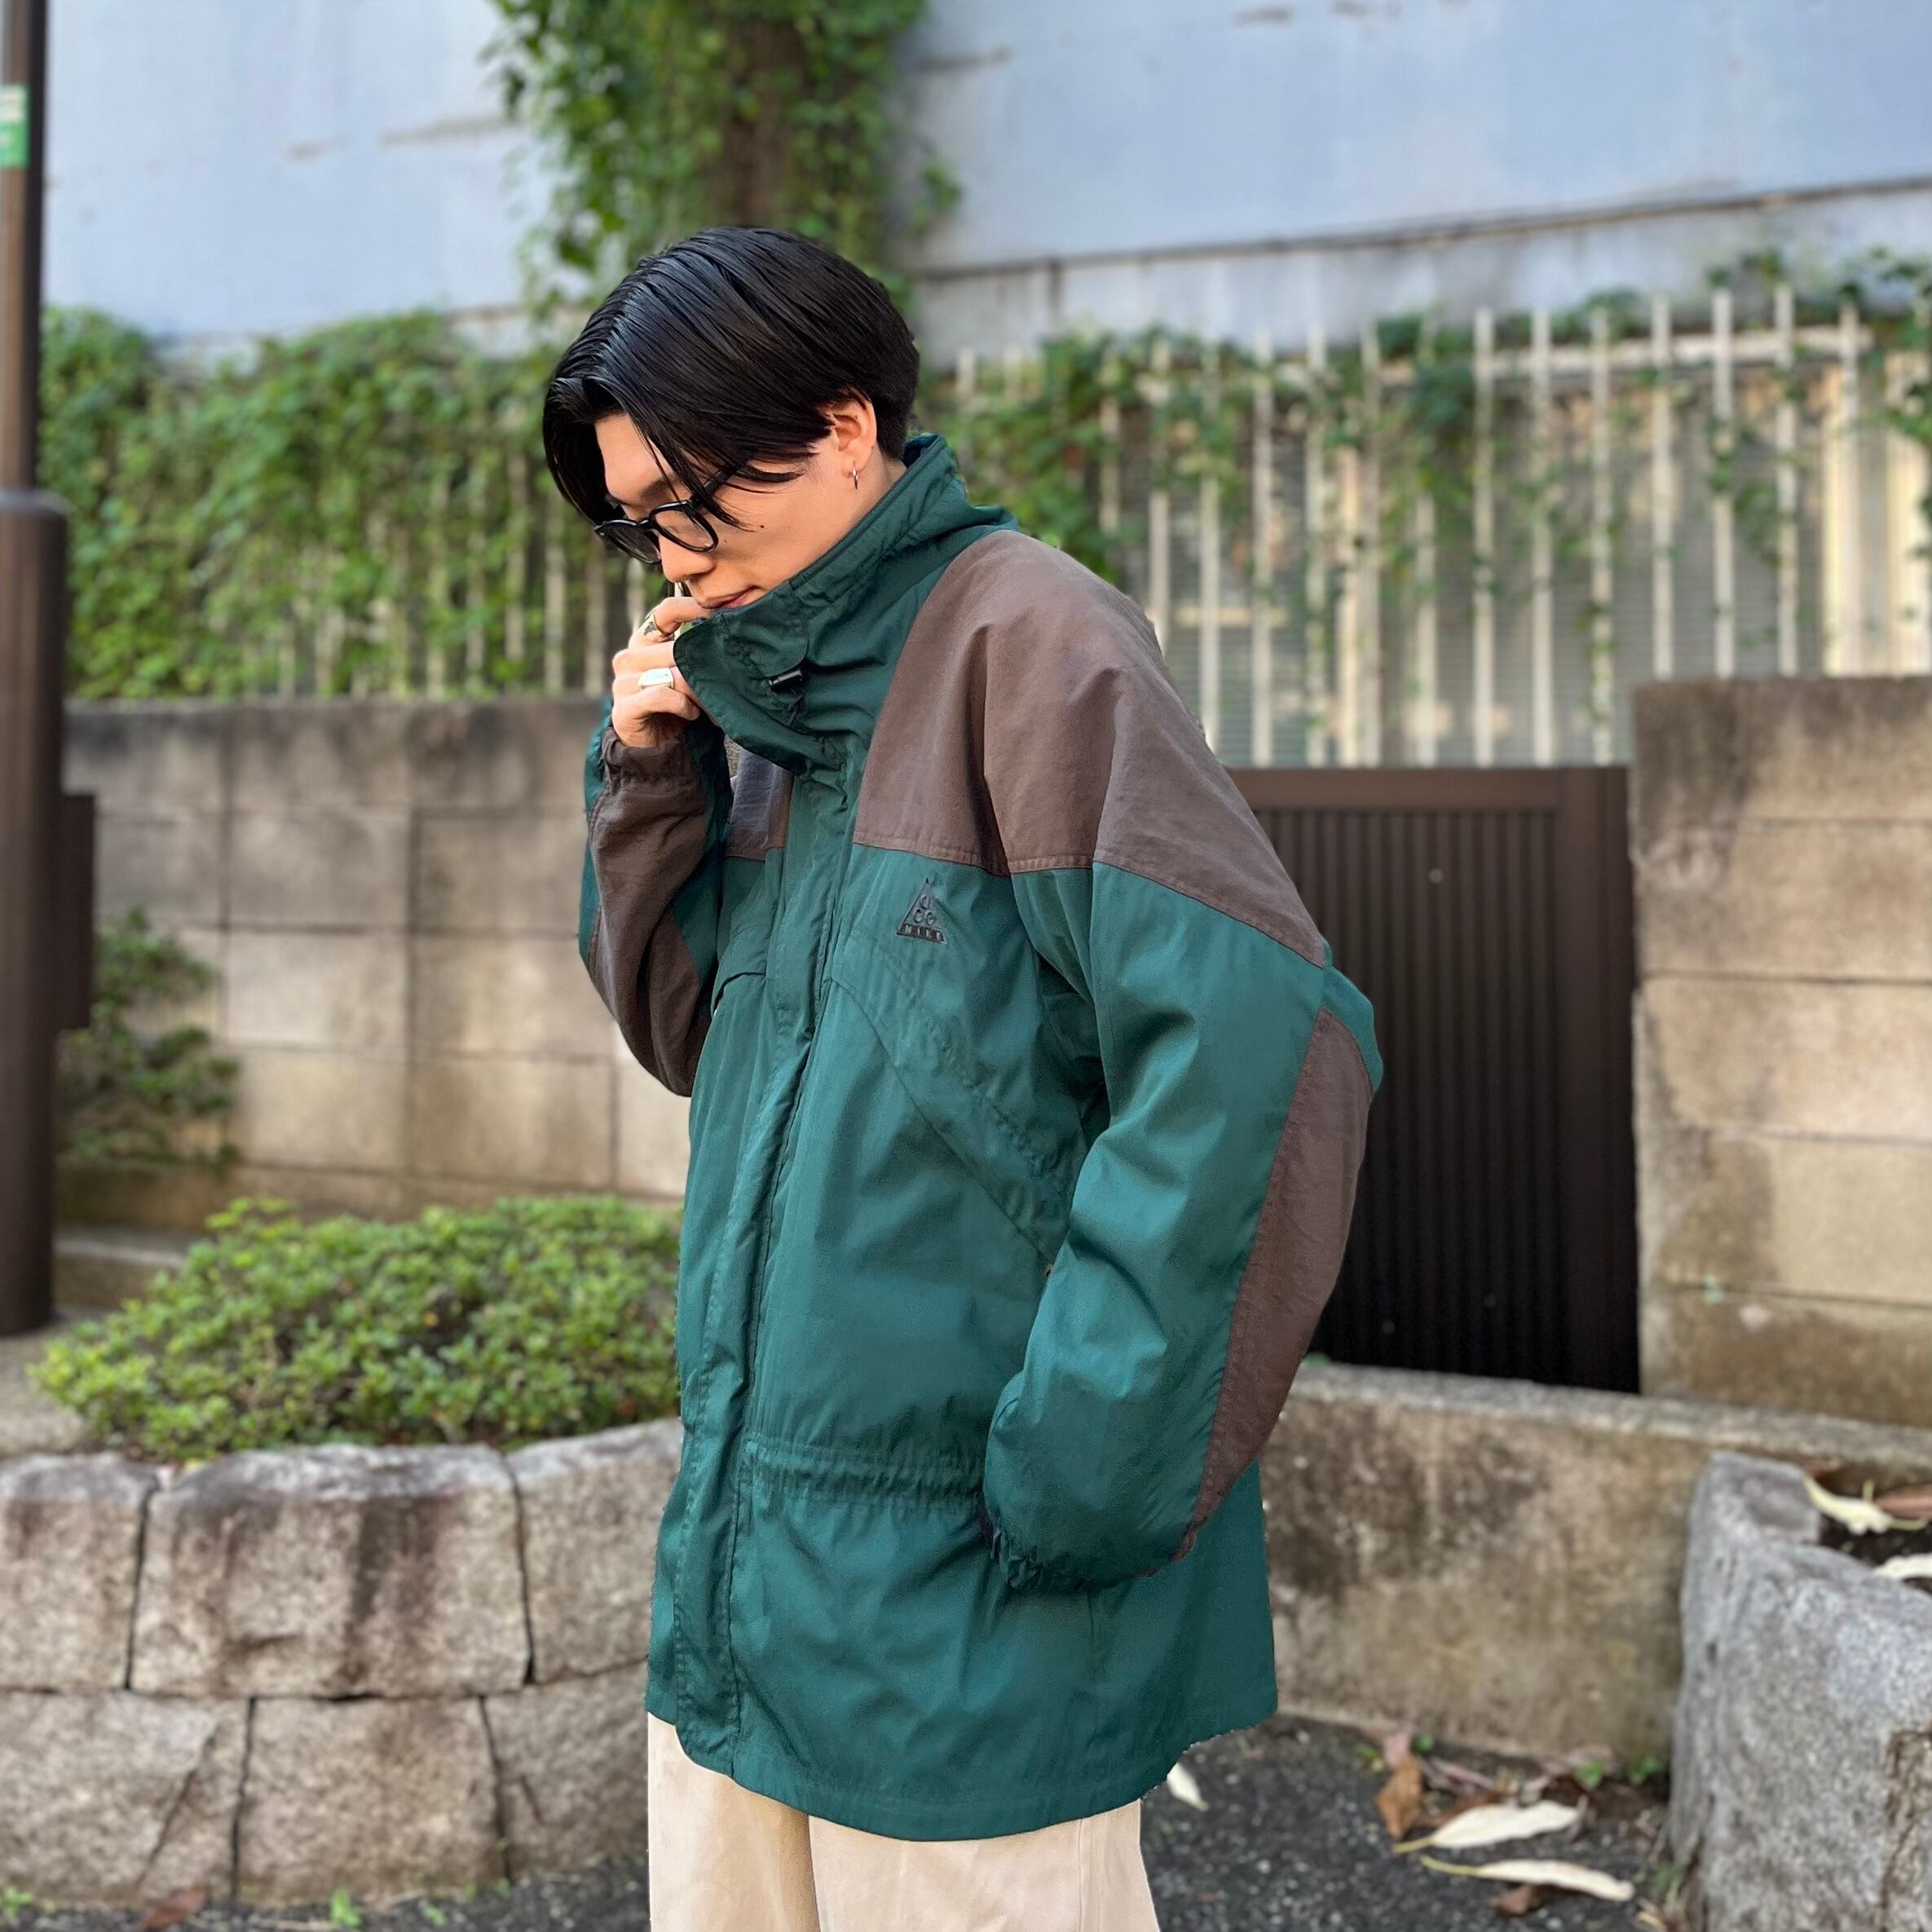 size:M【 ACG NIKE 】All Conditions Gear NIKE ナイロンジャケット 緑